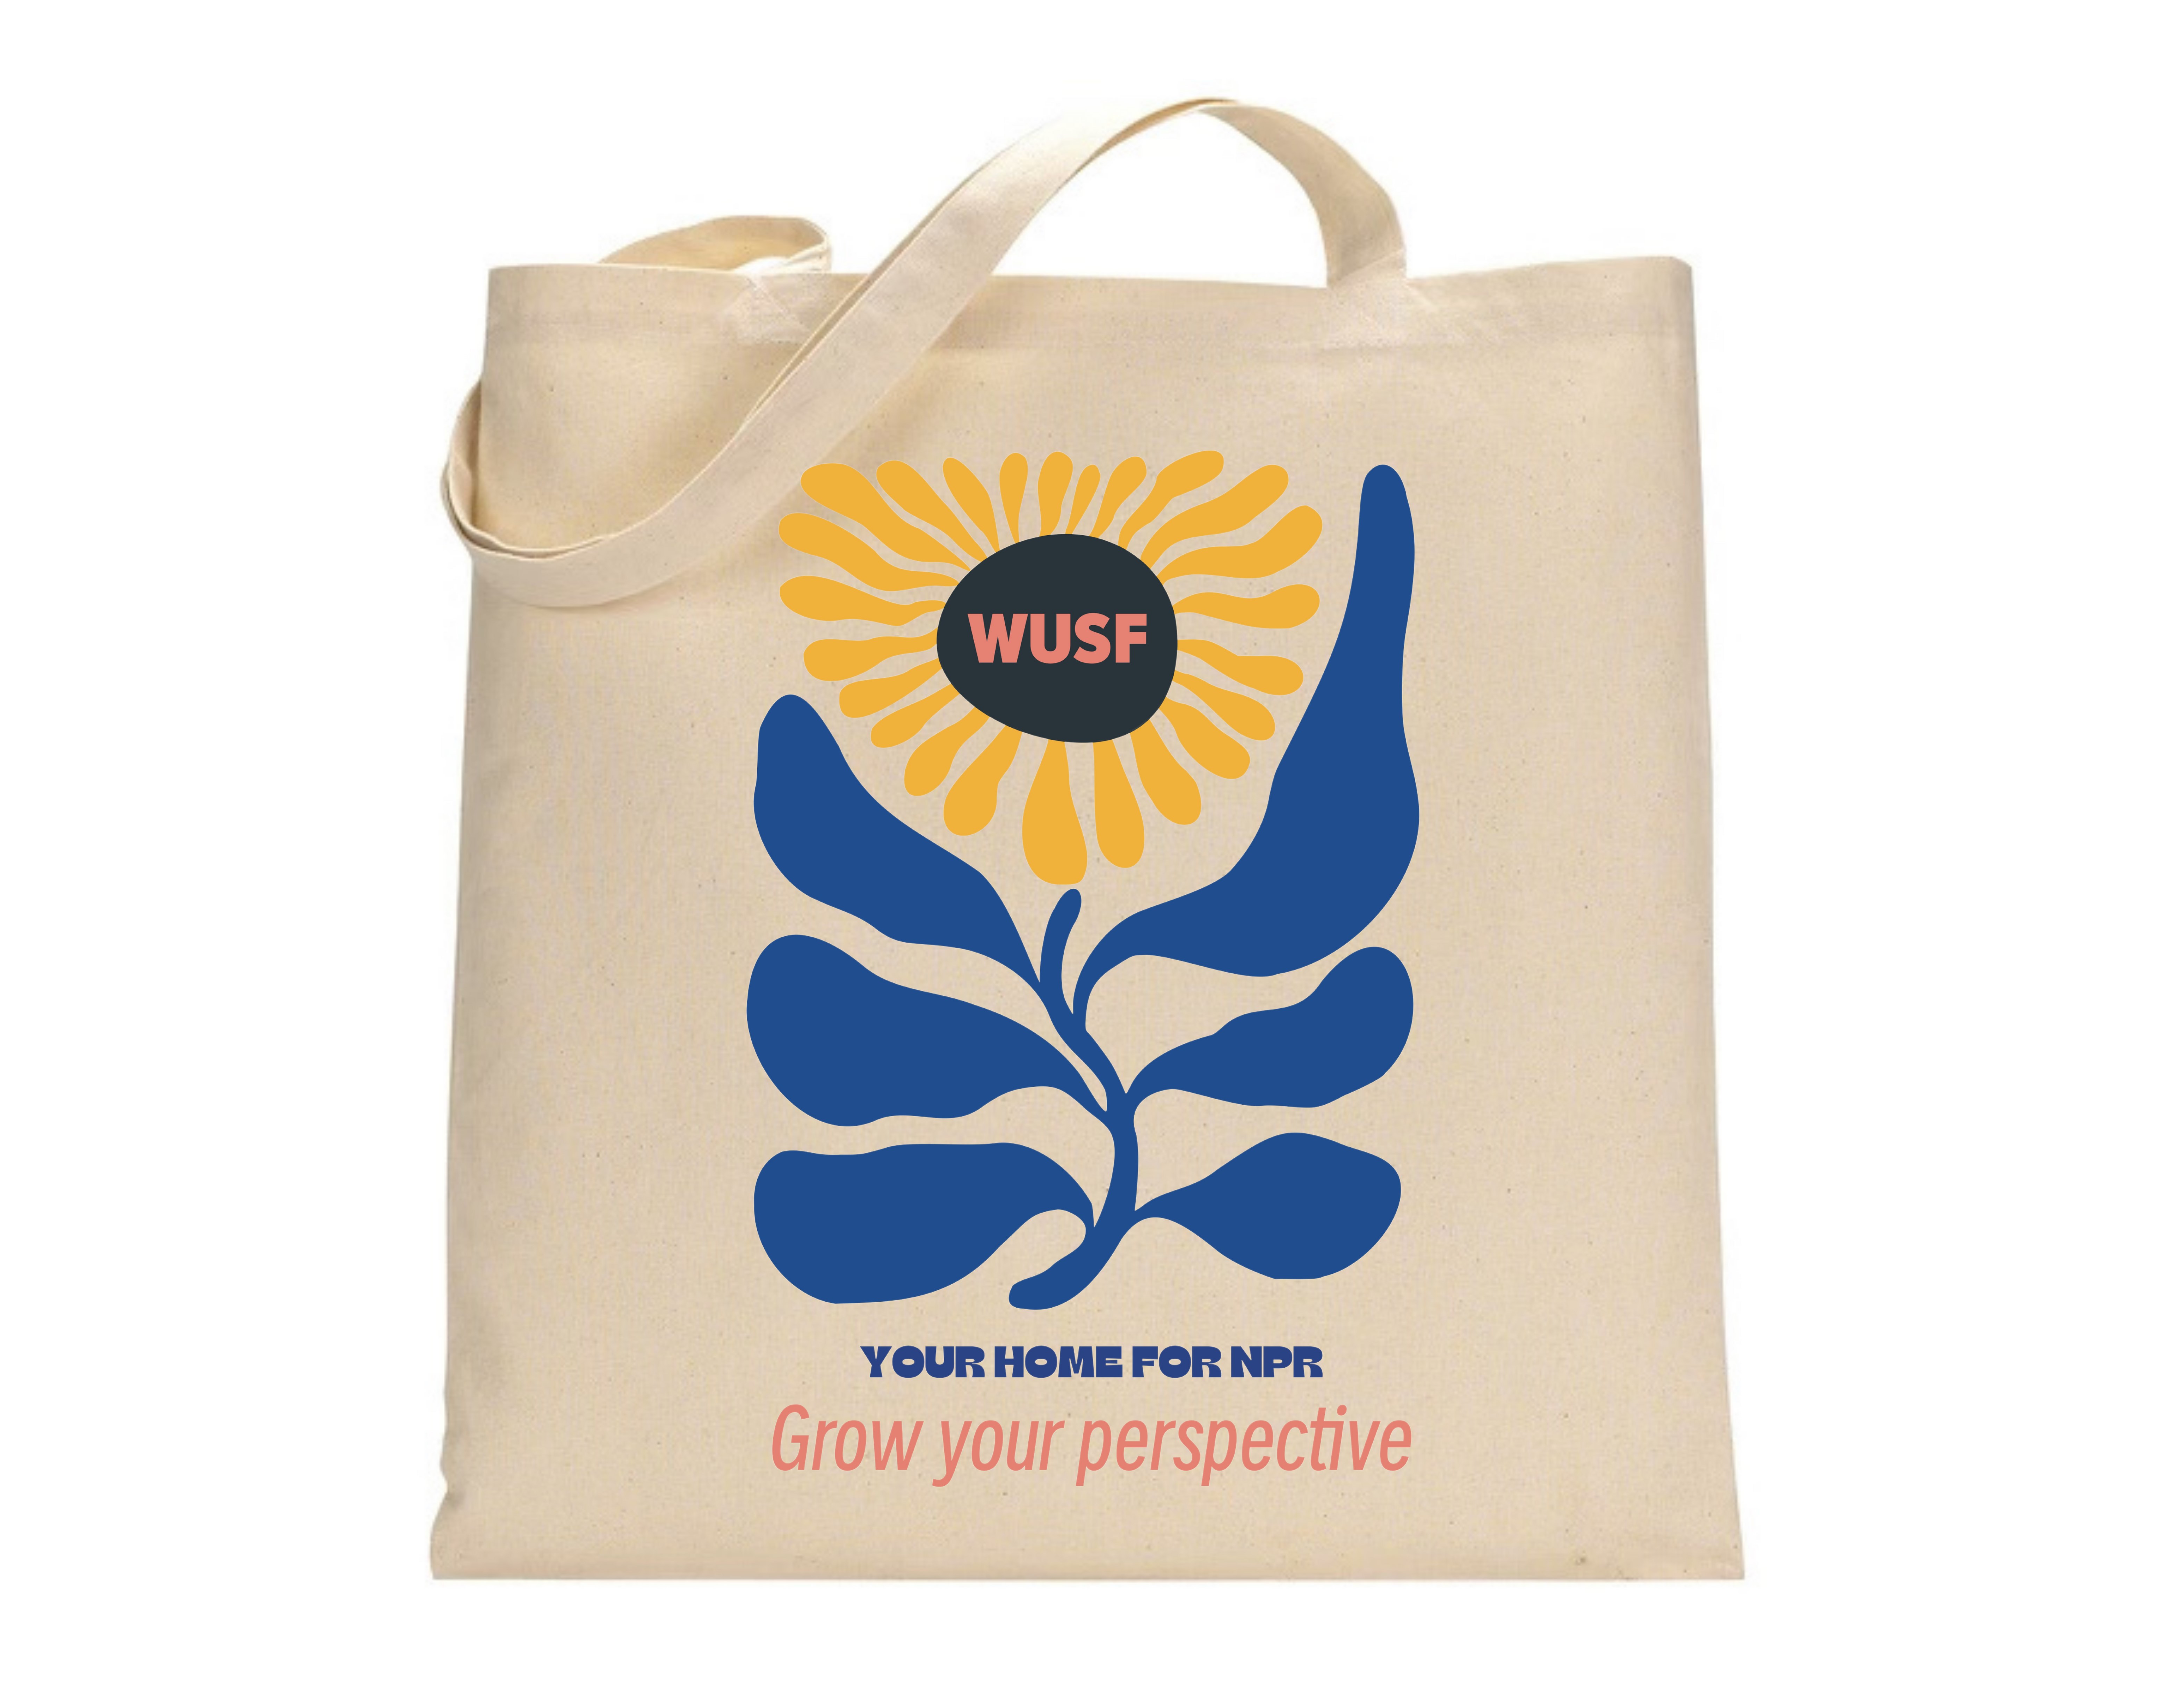 NEW! WUSF Canvas Tote